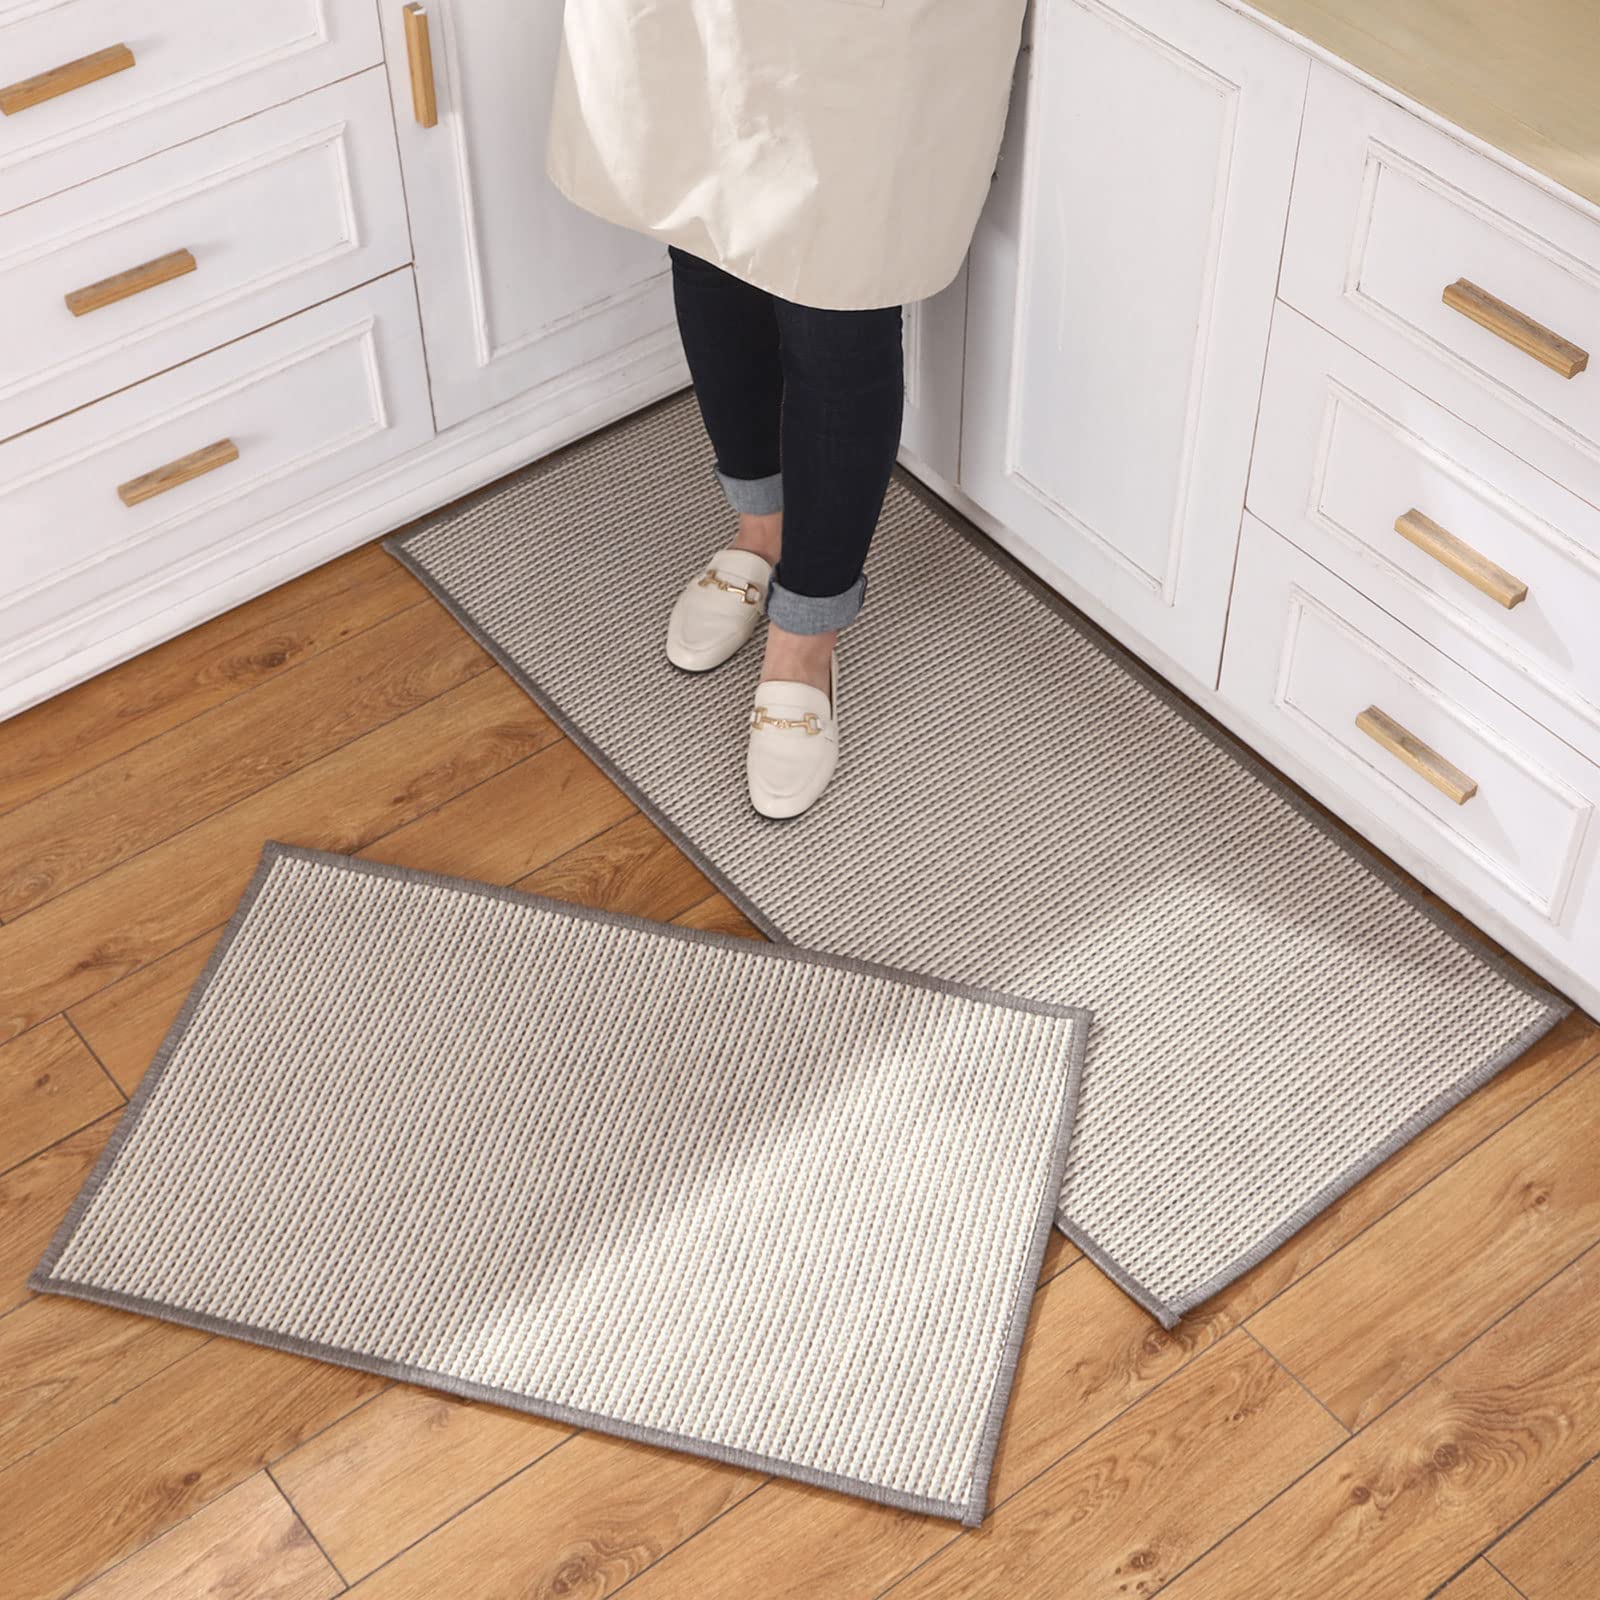 MATKIK Kitchen Rugs Washable Sets of 2 Pieces Farmhouse Kitchen Rugs and mats Non Skid Kitchen Runner Rugs Absorbent Rubber Kitchen Floor mats for in Front of Sink,Hallway,Laundry Room